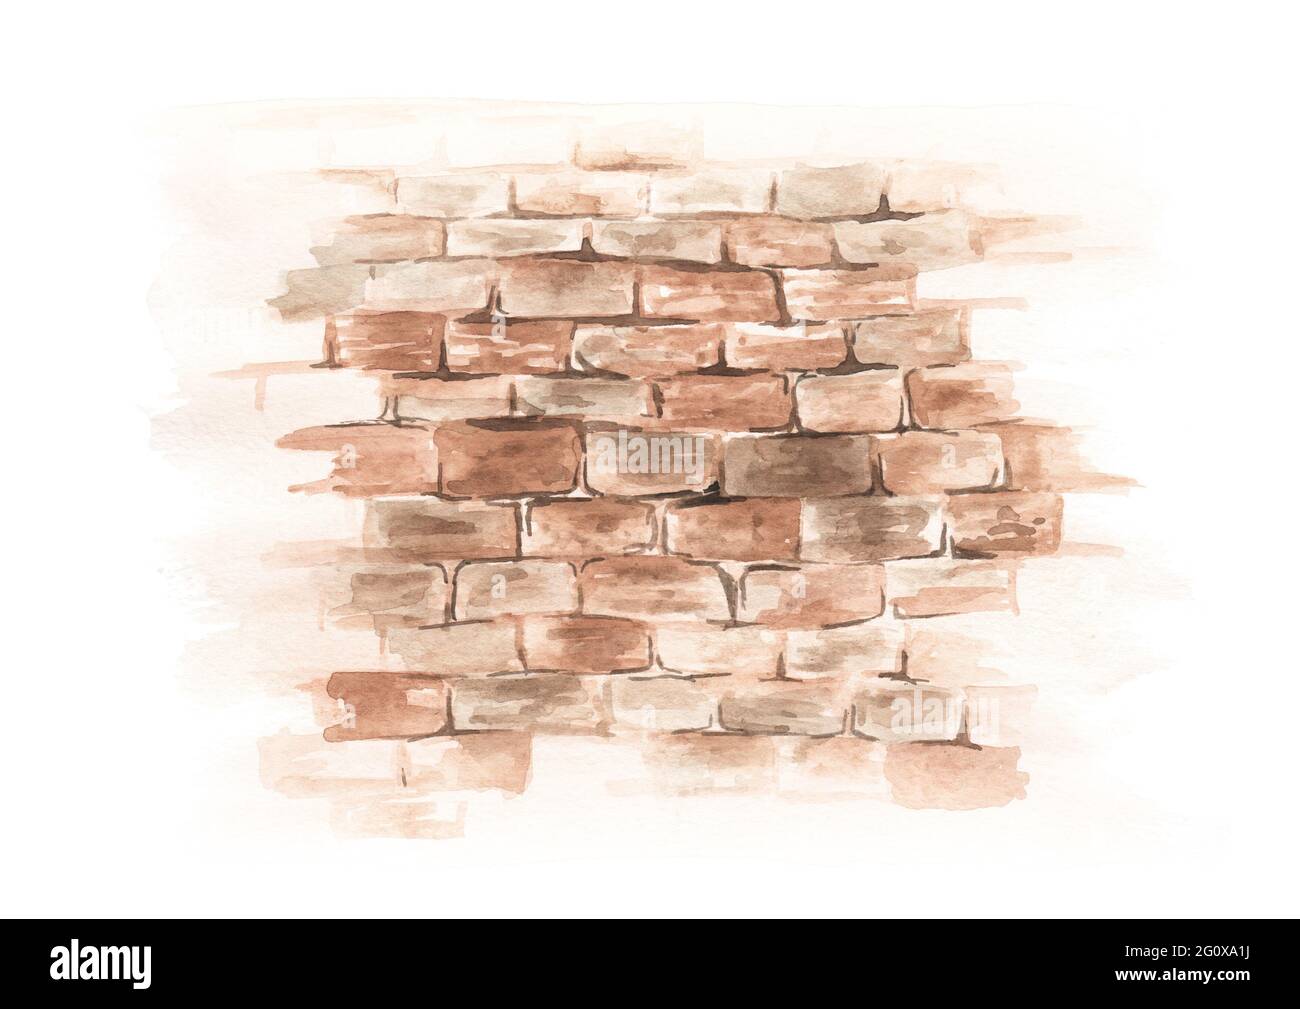 Brick grunge wall. Hand drawn watercolor illustration isolated on white background Stock Photo